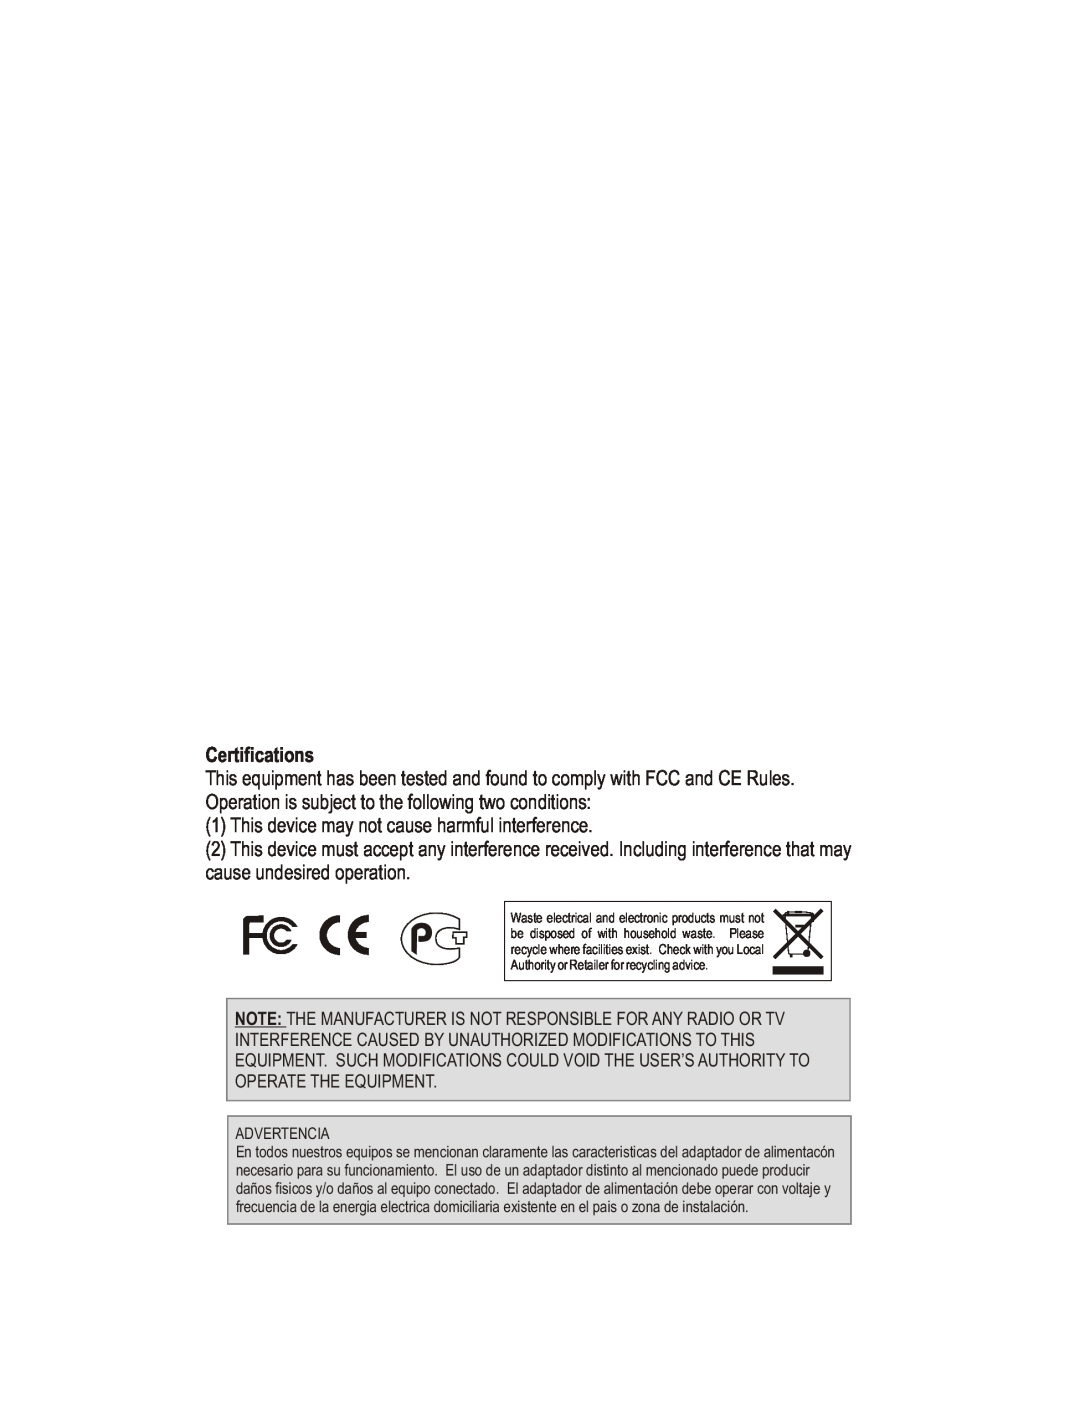 TRENDnet TEW-633GR manual Certifications, This device may not cause harmful interference 